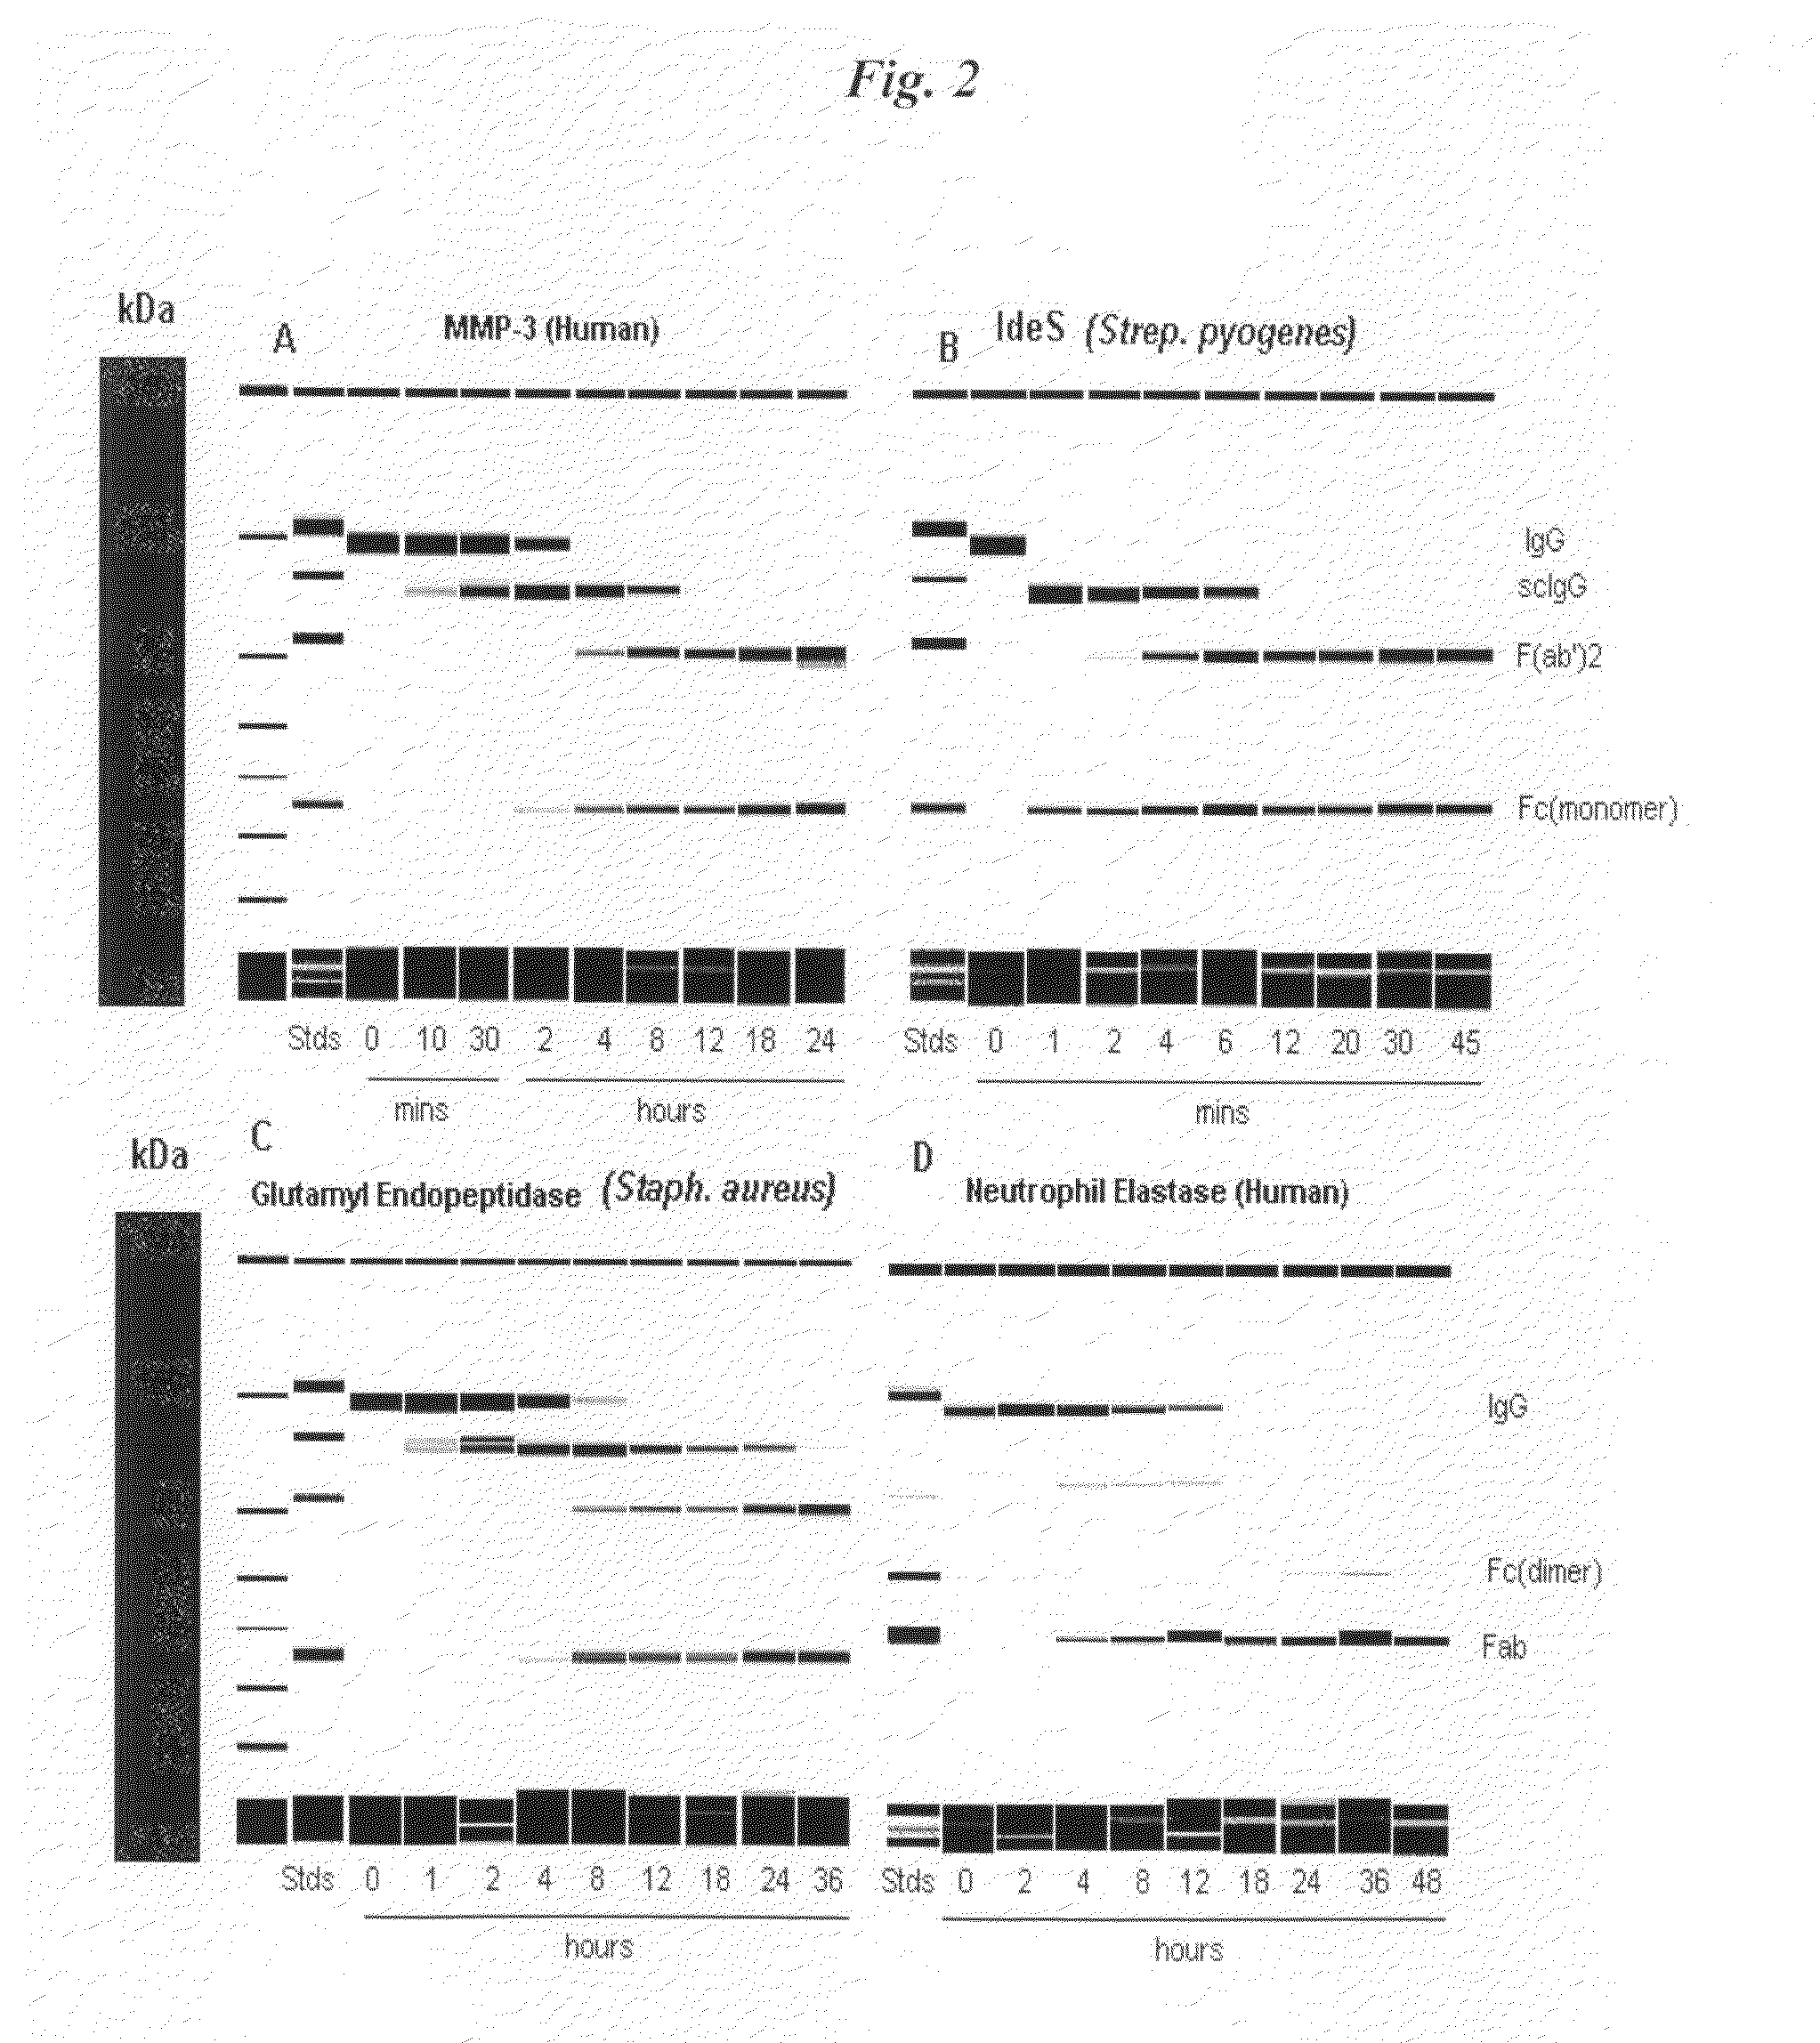 Immunoglobulin Cleavage Fragments as Disease Indicators and Compositions for Detecting and Binding Such